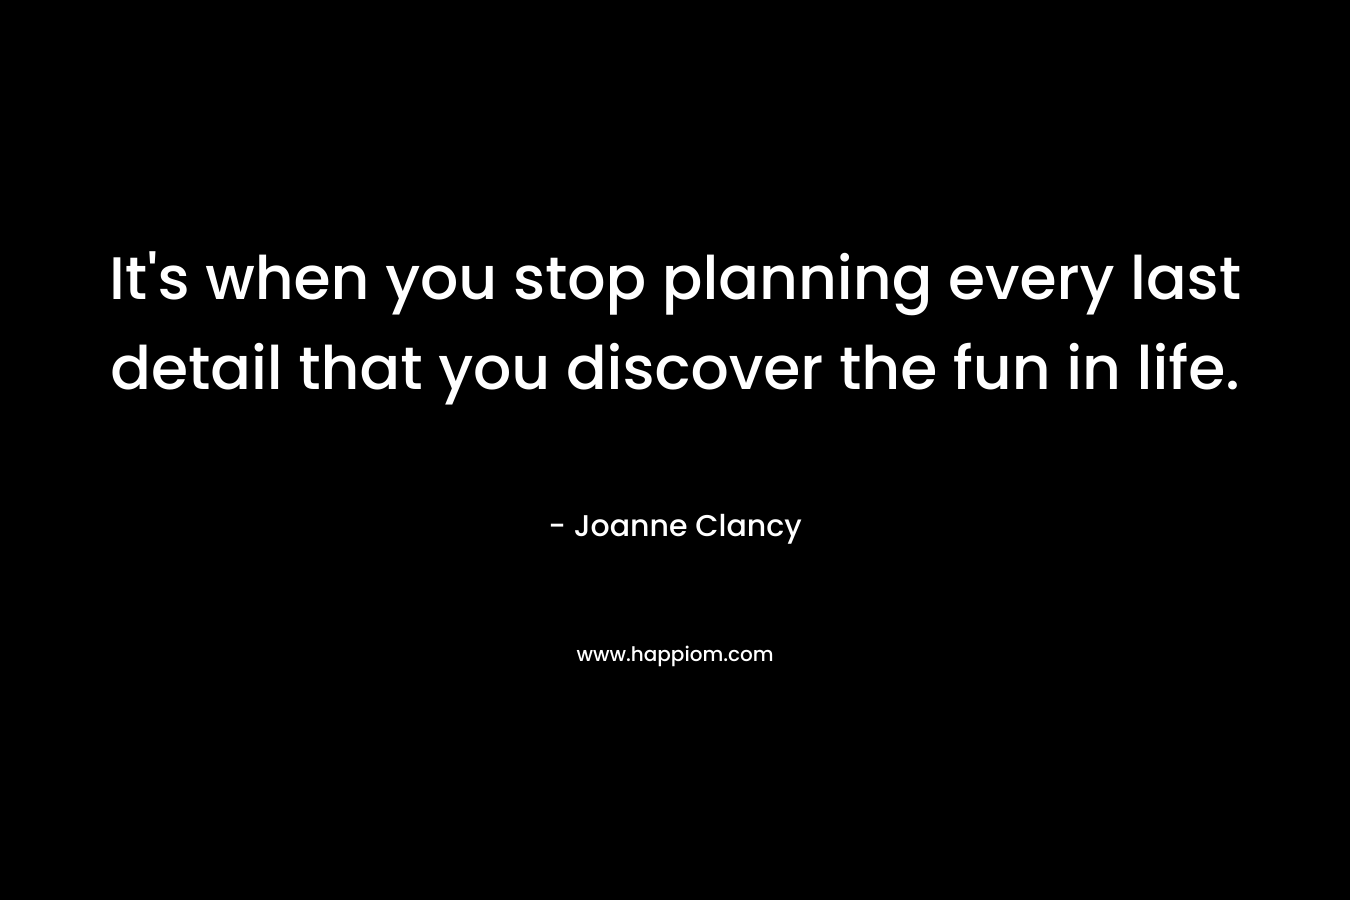 It's when you stop planning every last detail that you discover the fun in life.